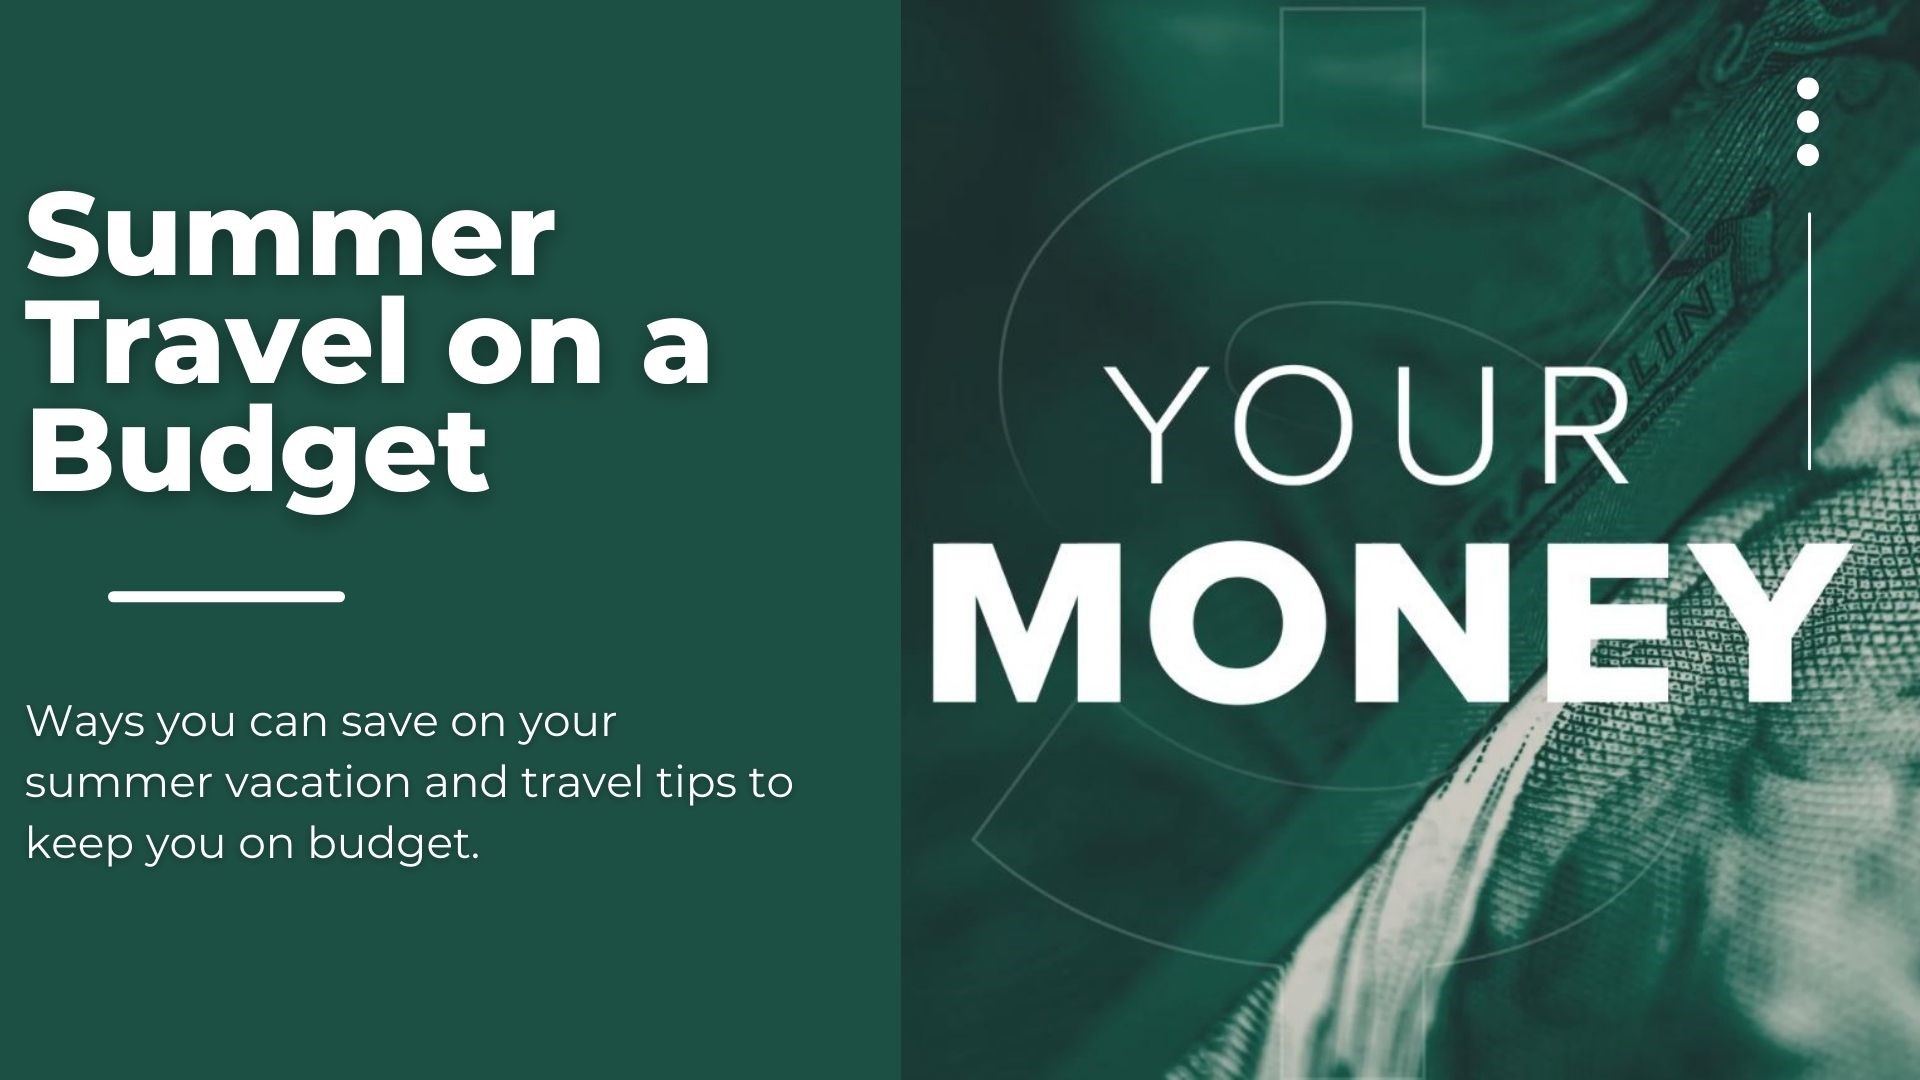 Ways you can save on your summer vacation and travel tips to keep you on budget.